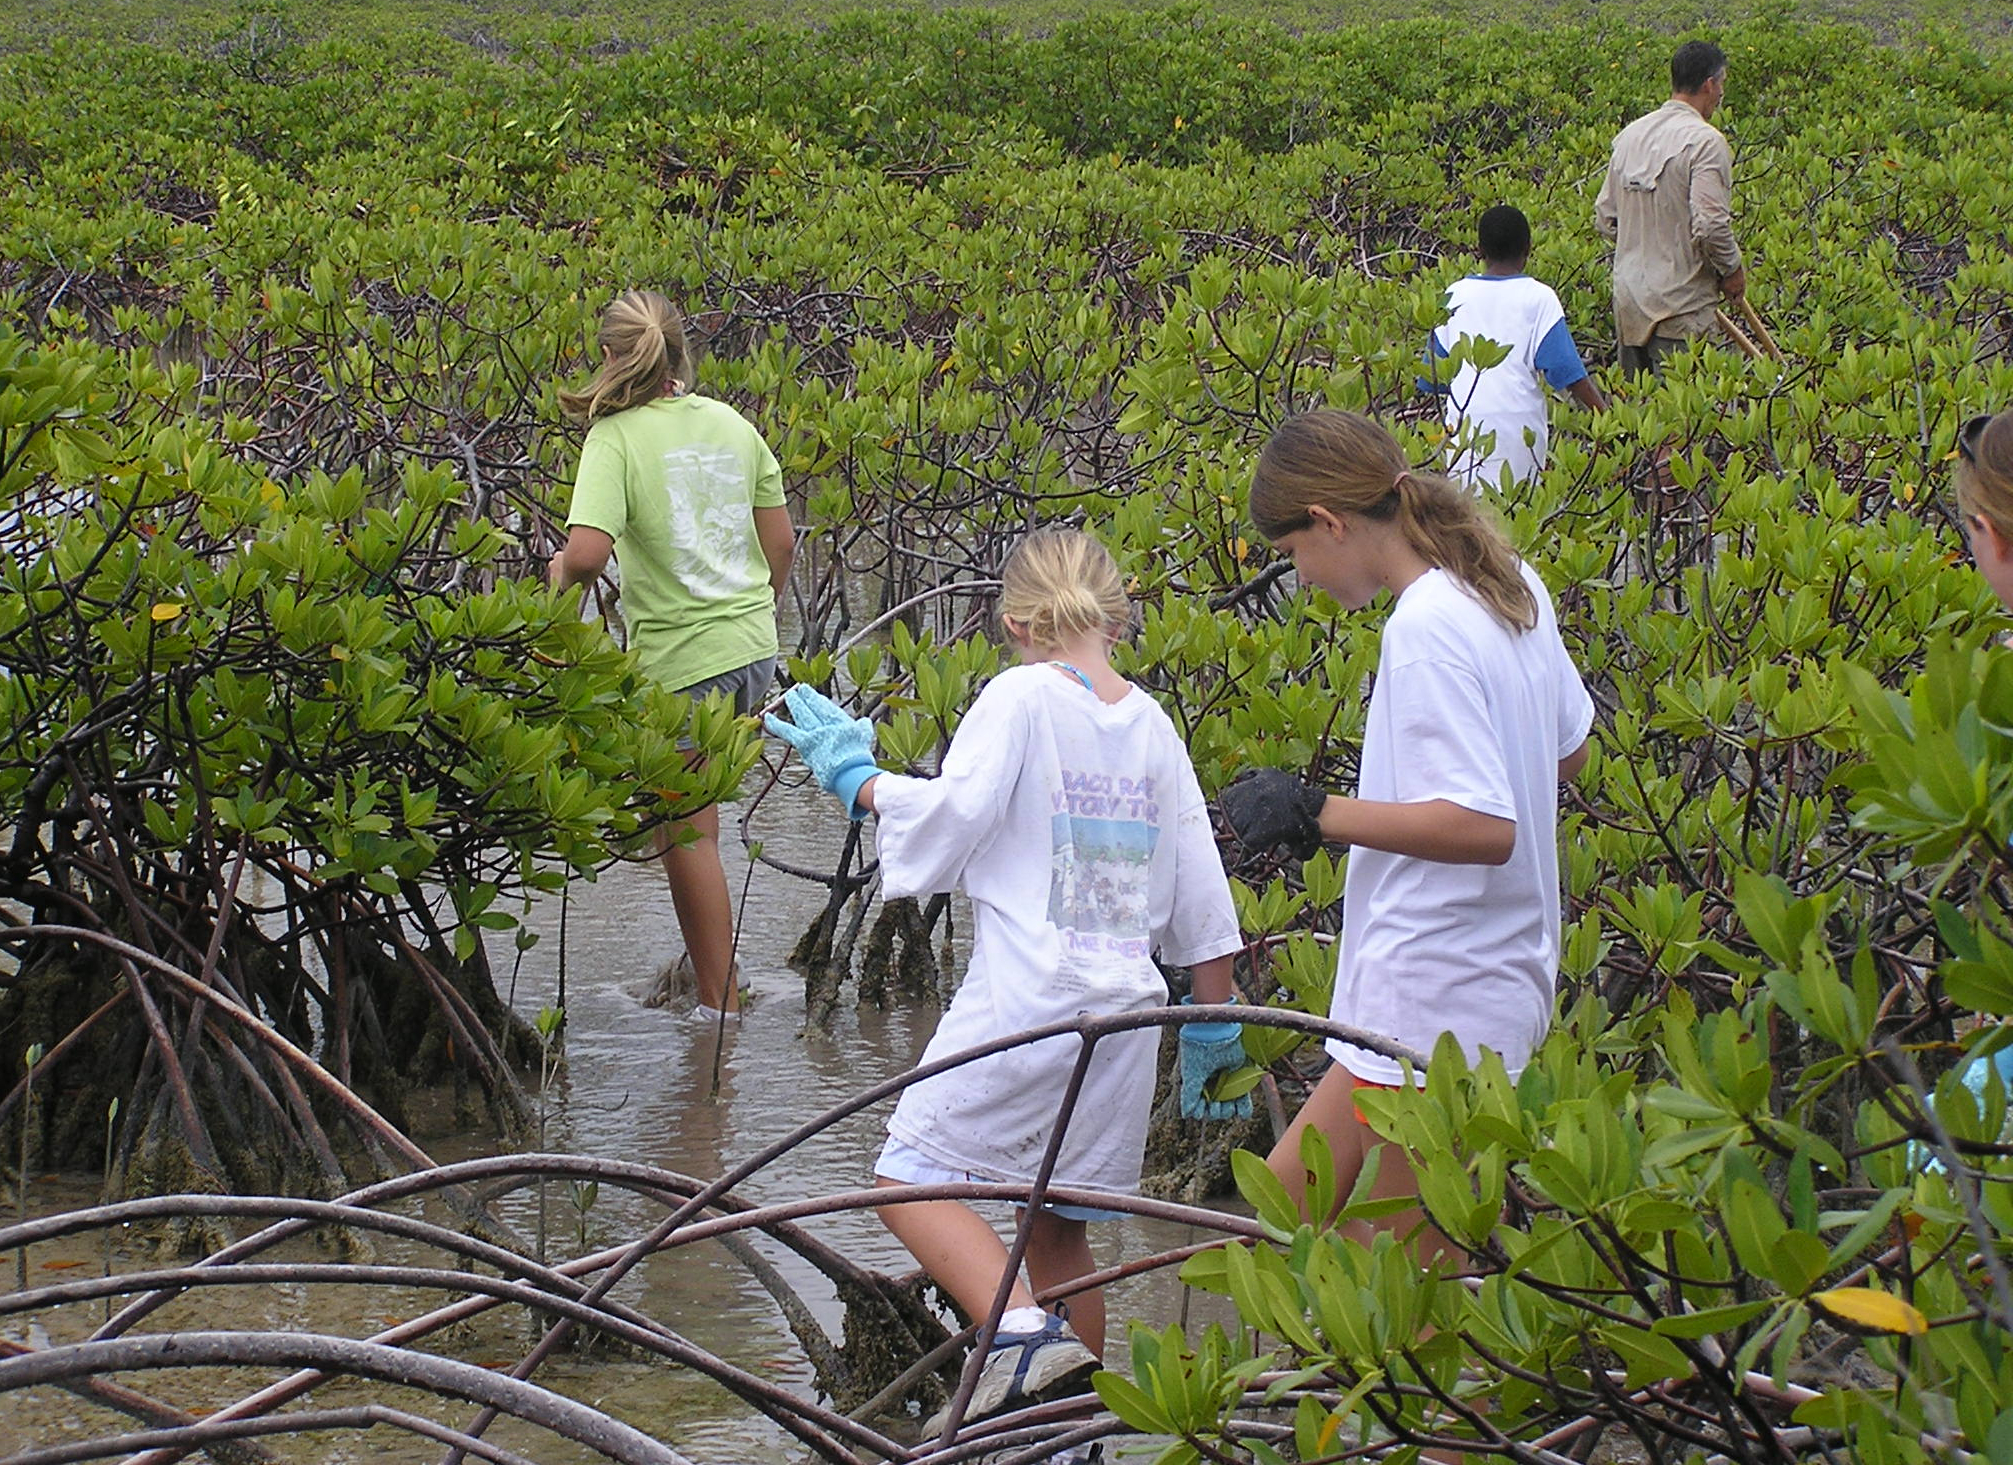 Sandwatchers observing and measuring mangroves in the Bahamas
